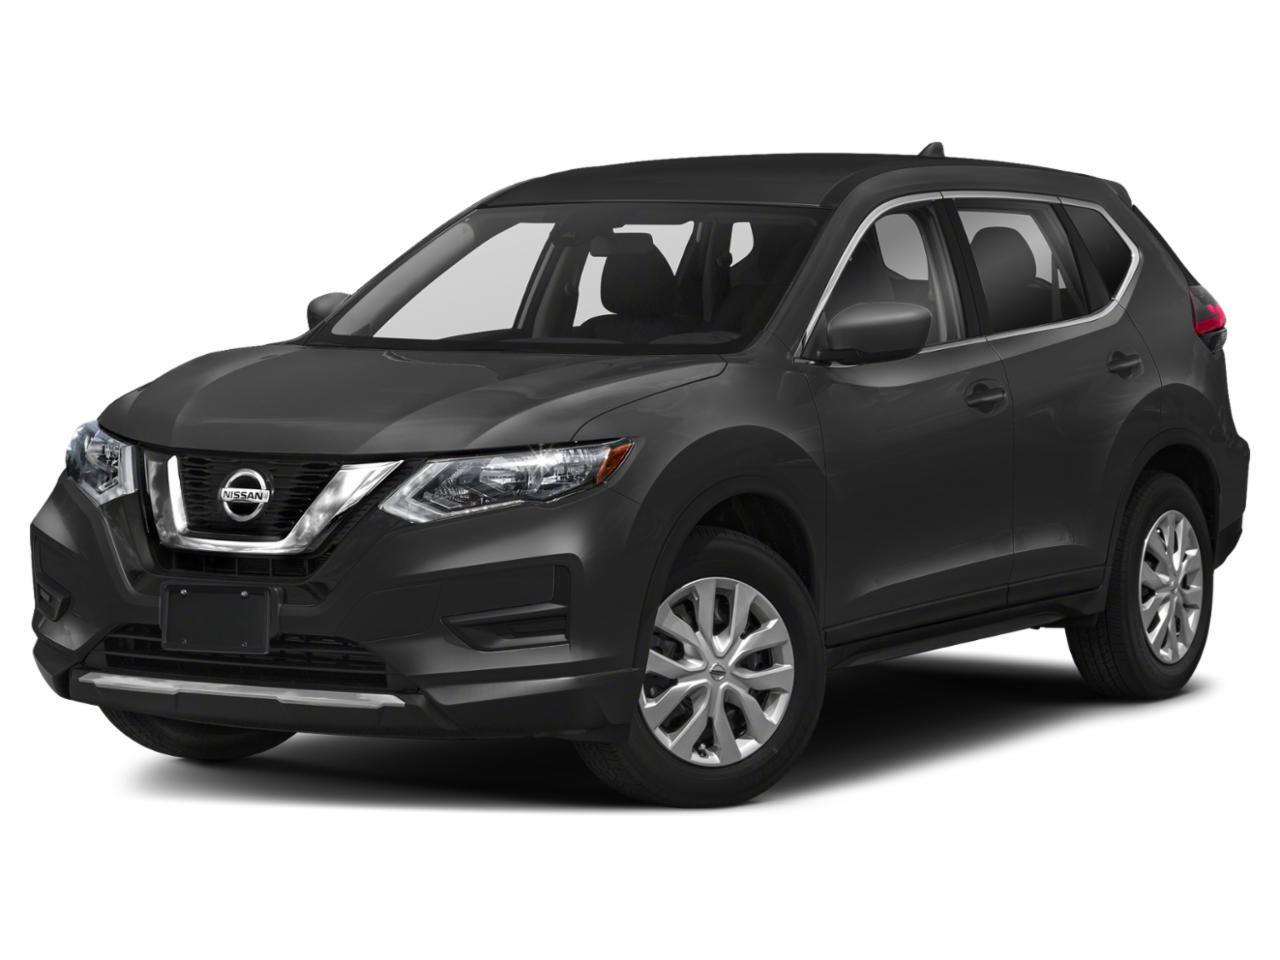 2020 Nissan Rogue Low Kms, One Owner, Great Shape